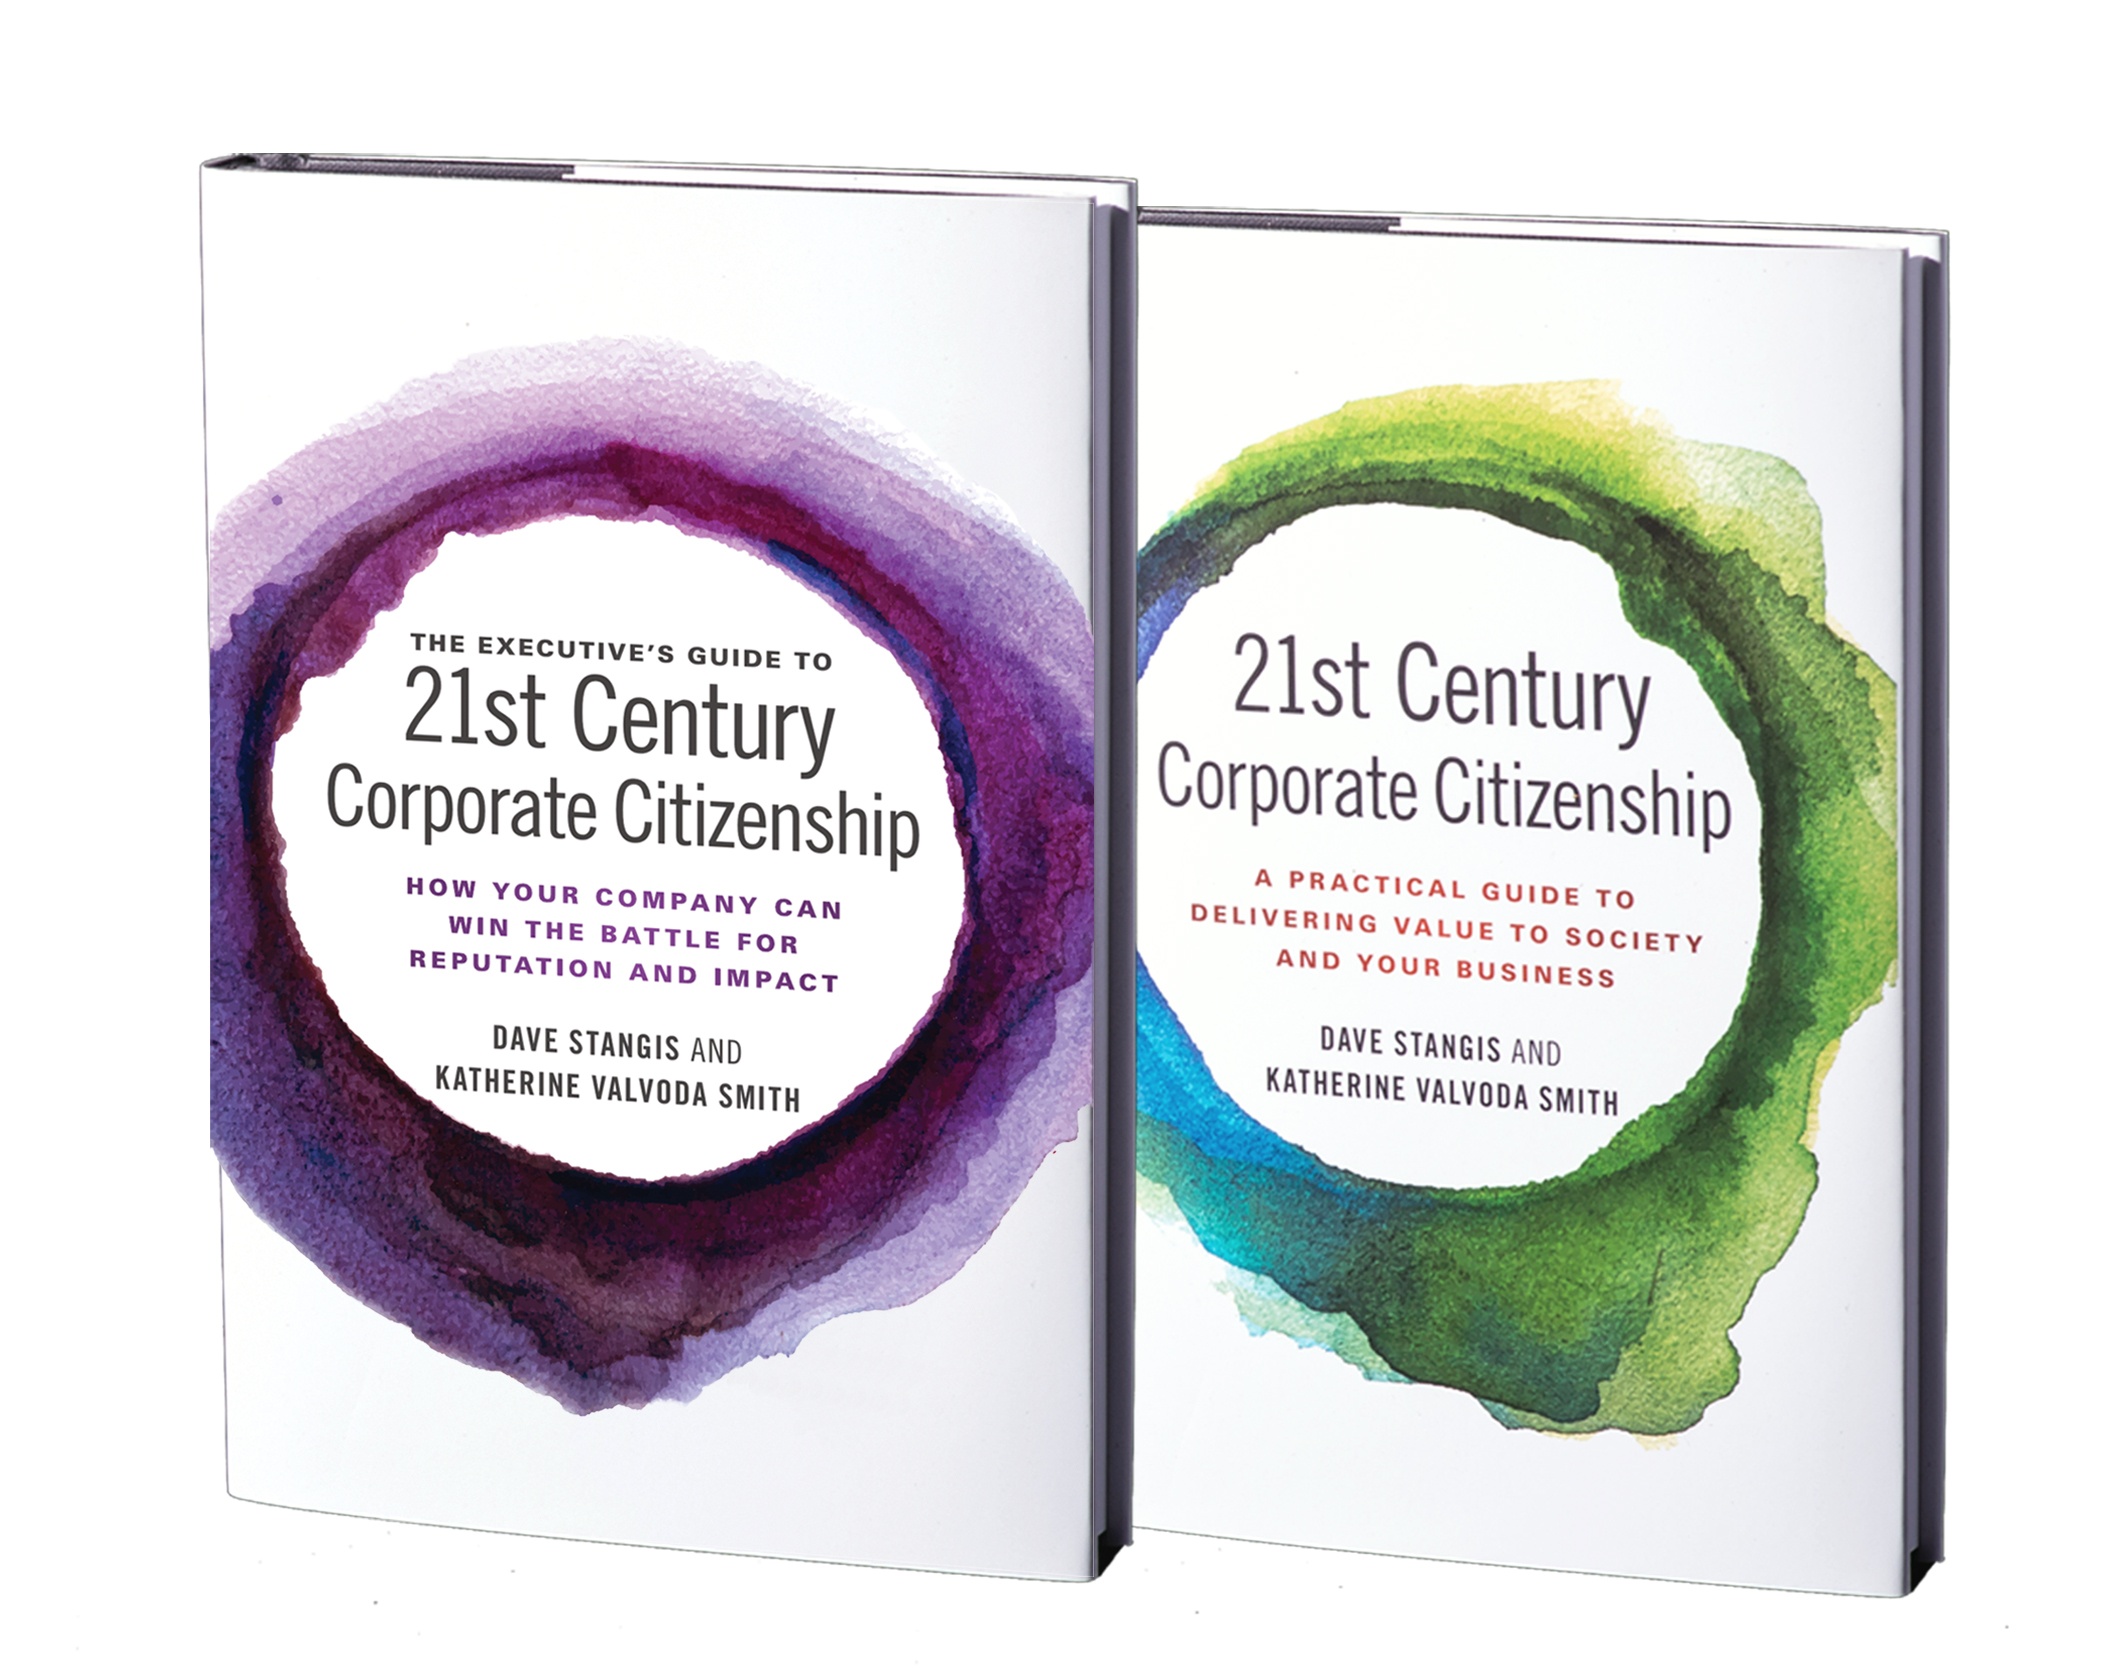 the cover of the 21st Century Corporate Citizenship book